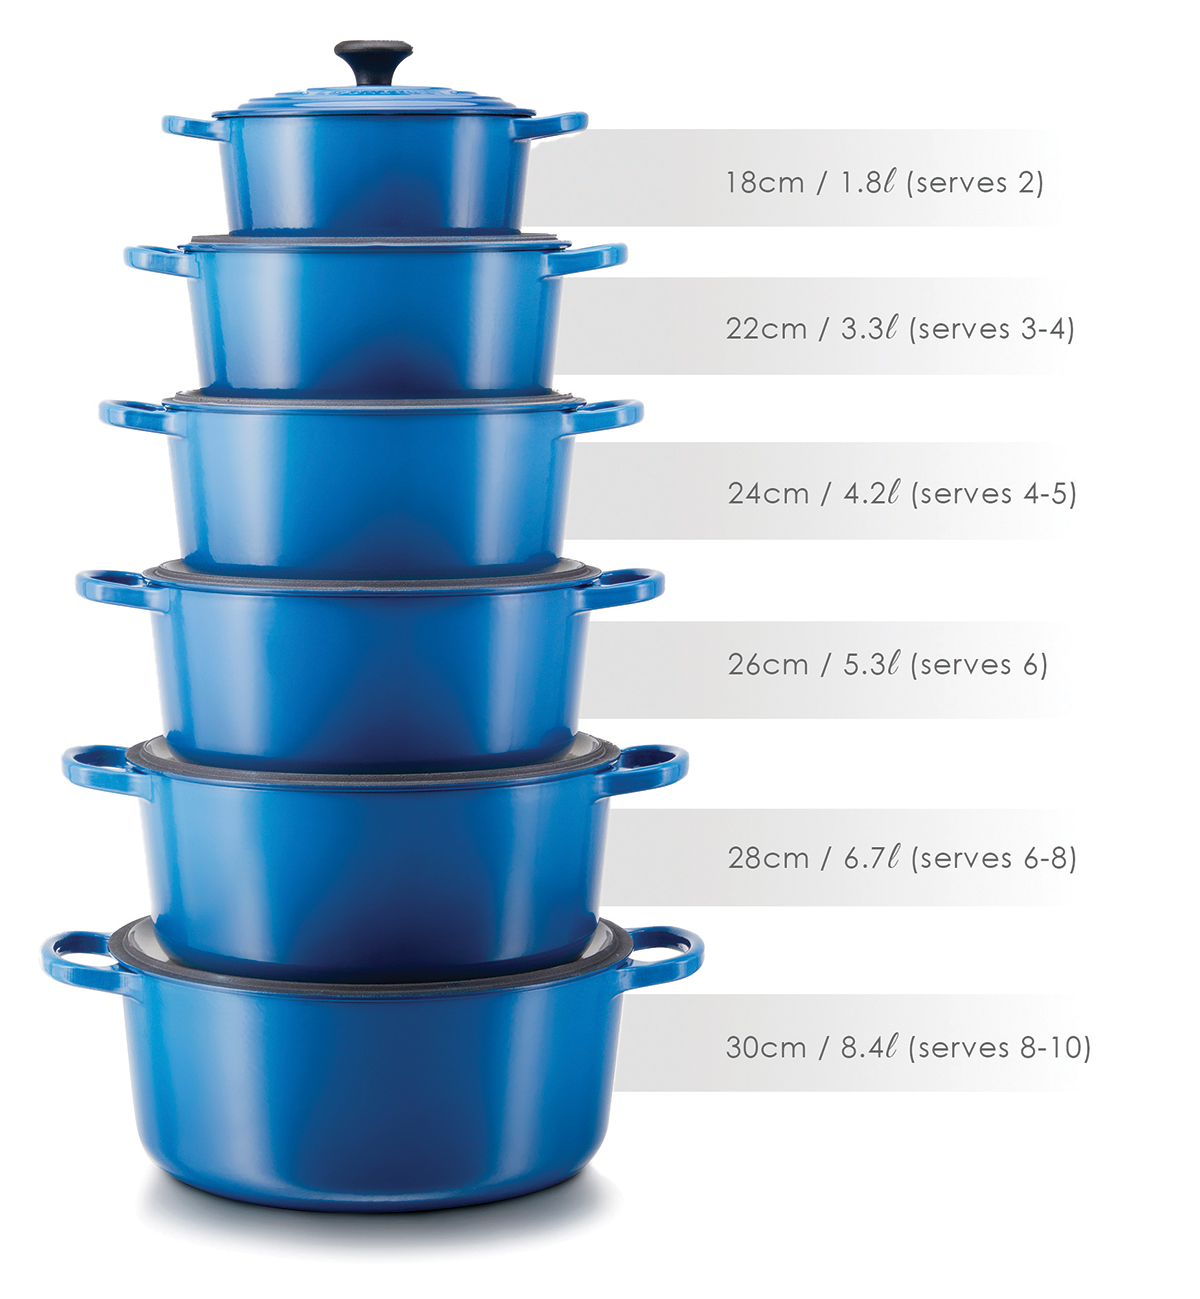 pot-and-pan-sizes-sizes-creuset-le-pan-casserole-kitchen-dutch-oven-tower-guide-cookware